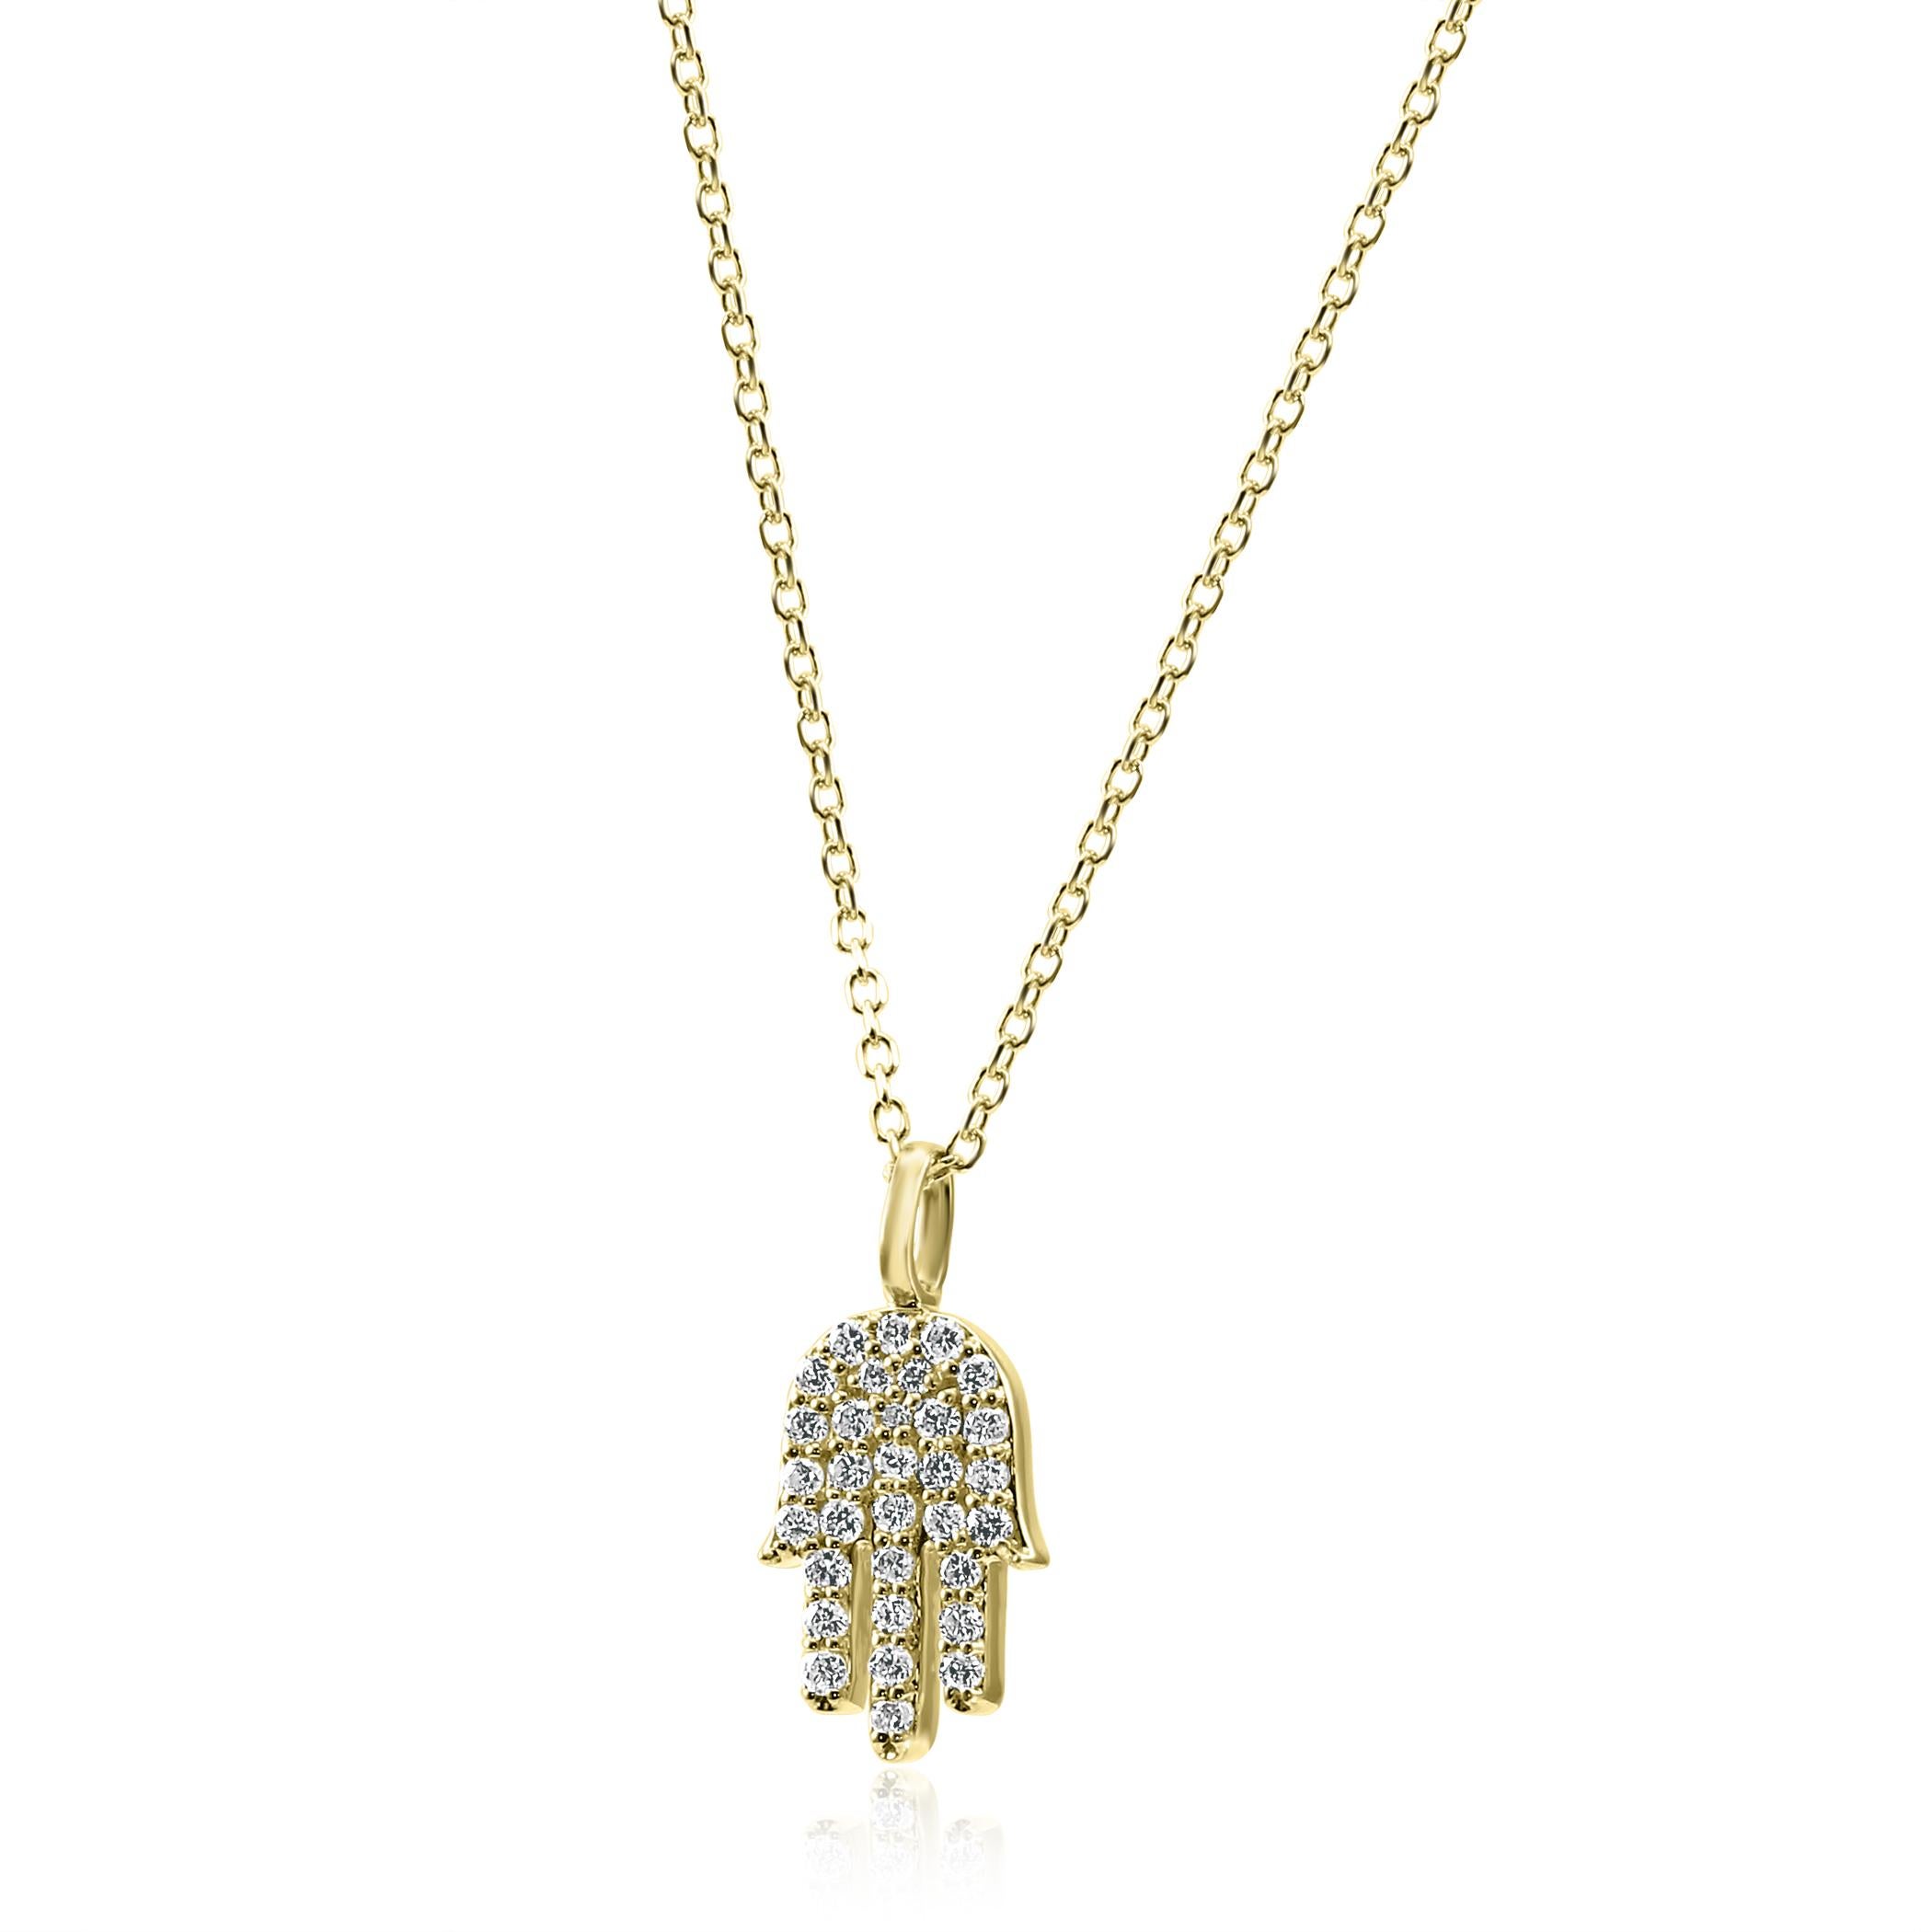 32 White G-H Color SI clarity 0.25 Carat Diamond Round Set in 14K Yellow Gold Hamsa Drop Pendant Chain Necklace.
Total Diamond Weight 0.25 Carat

Style available in different price ranges and with different center stones and gold color, can be